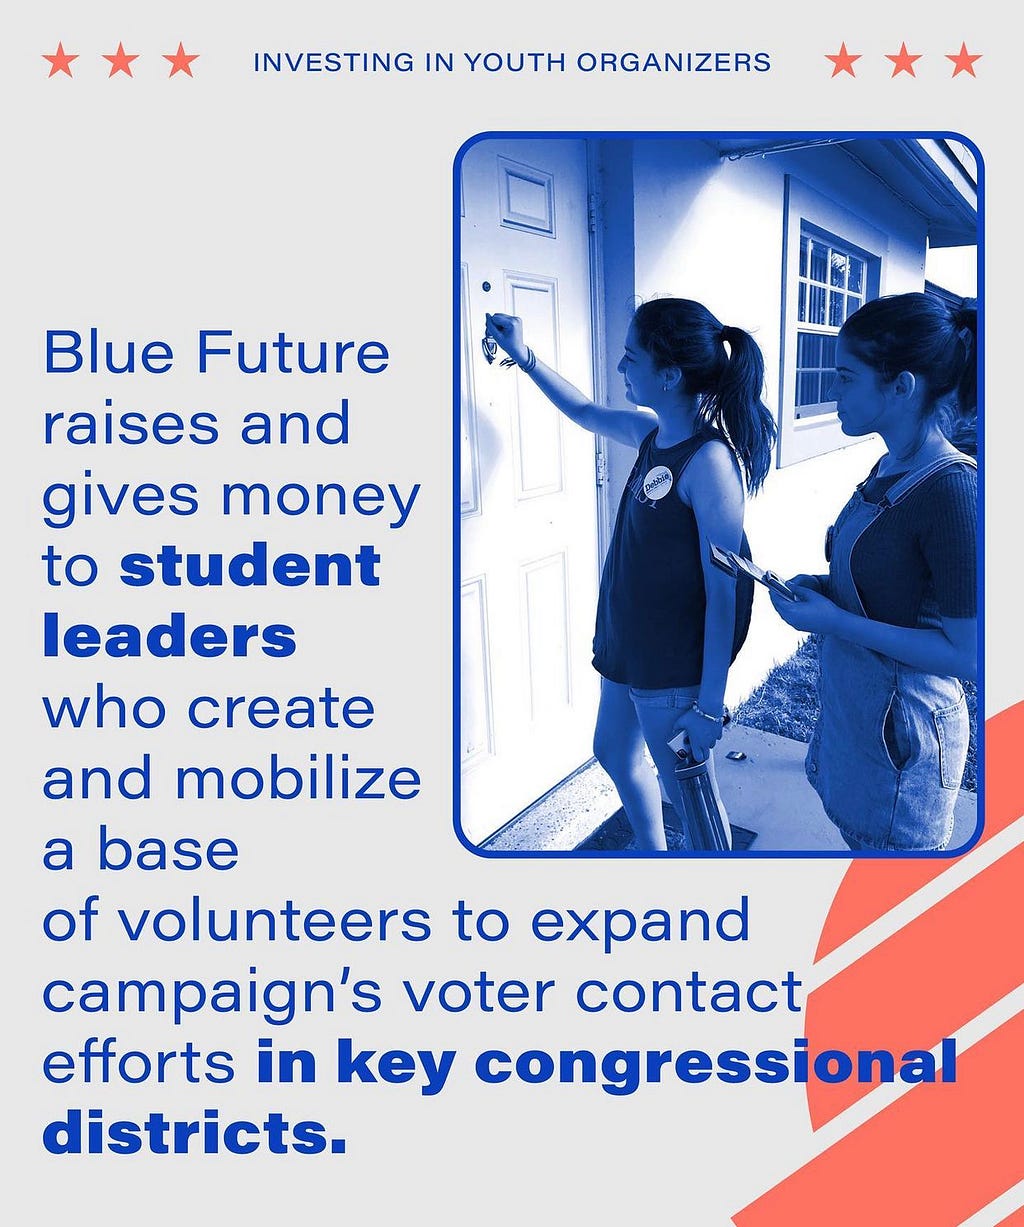 Blue Future graphic, reads “Blue Future raises and gives money to student leaders who create and mobilize a base of volunteers to expand campaign’s voter contact efforts in key congressional districts.” Includes image of students knocking on doors.